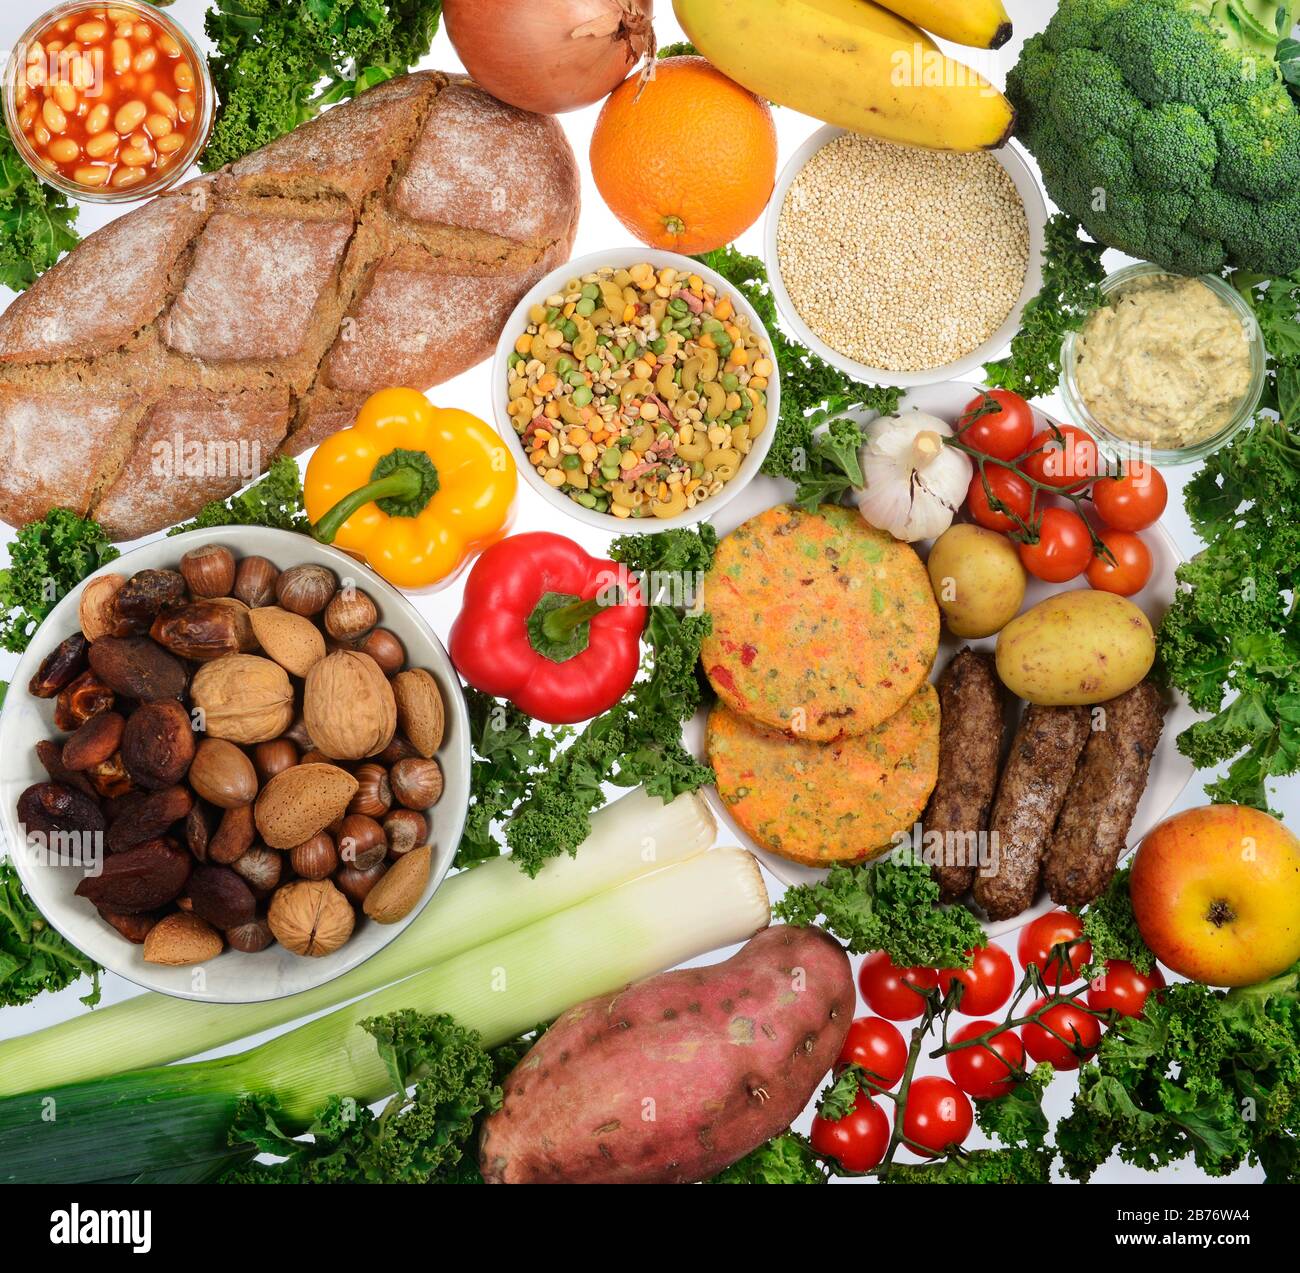 Vegan food, including bread, vegetables, fresh fruit, vegan burgers and sausages, hummus, quinoa, beans, peas, pulses, pasta, dried fruit and nuts. Stock Photo